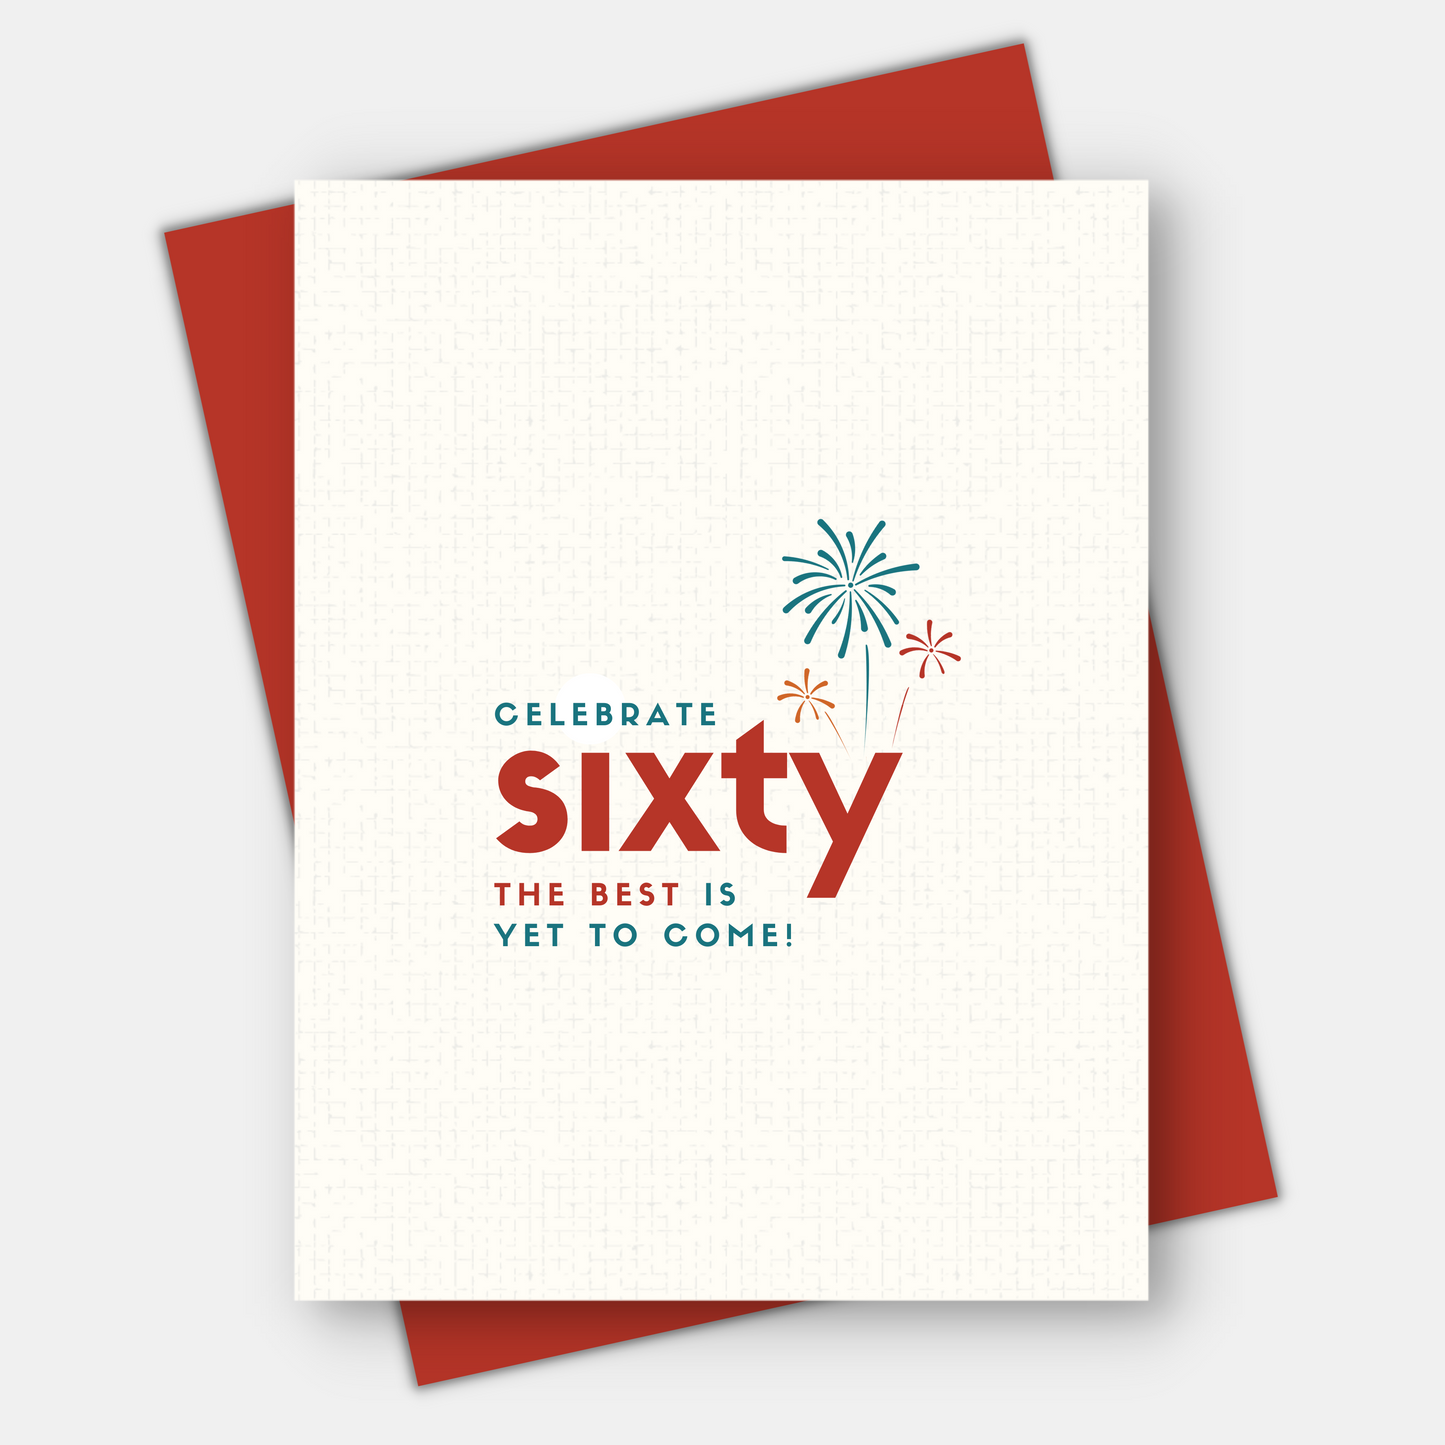 50th, 60th, or 70th milestone birthday card, Celebrate, the Best is Yet to Come!